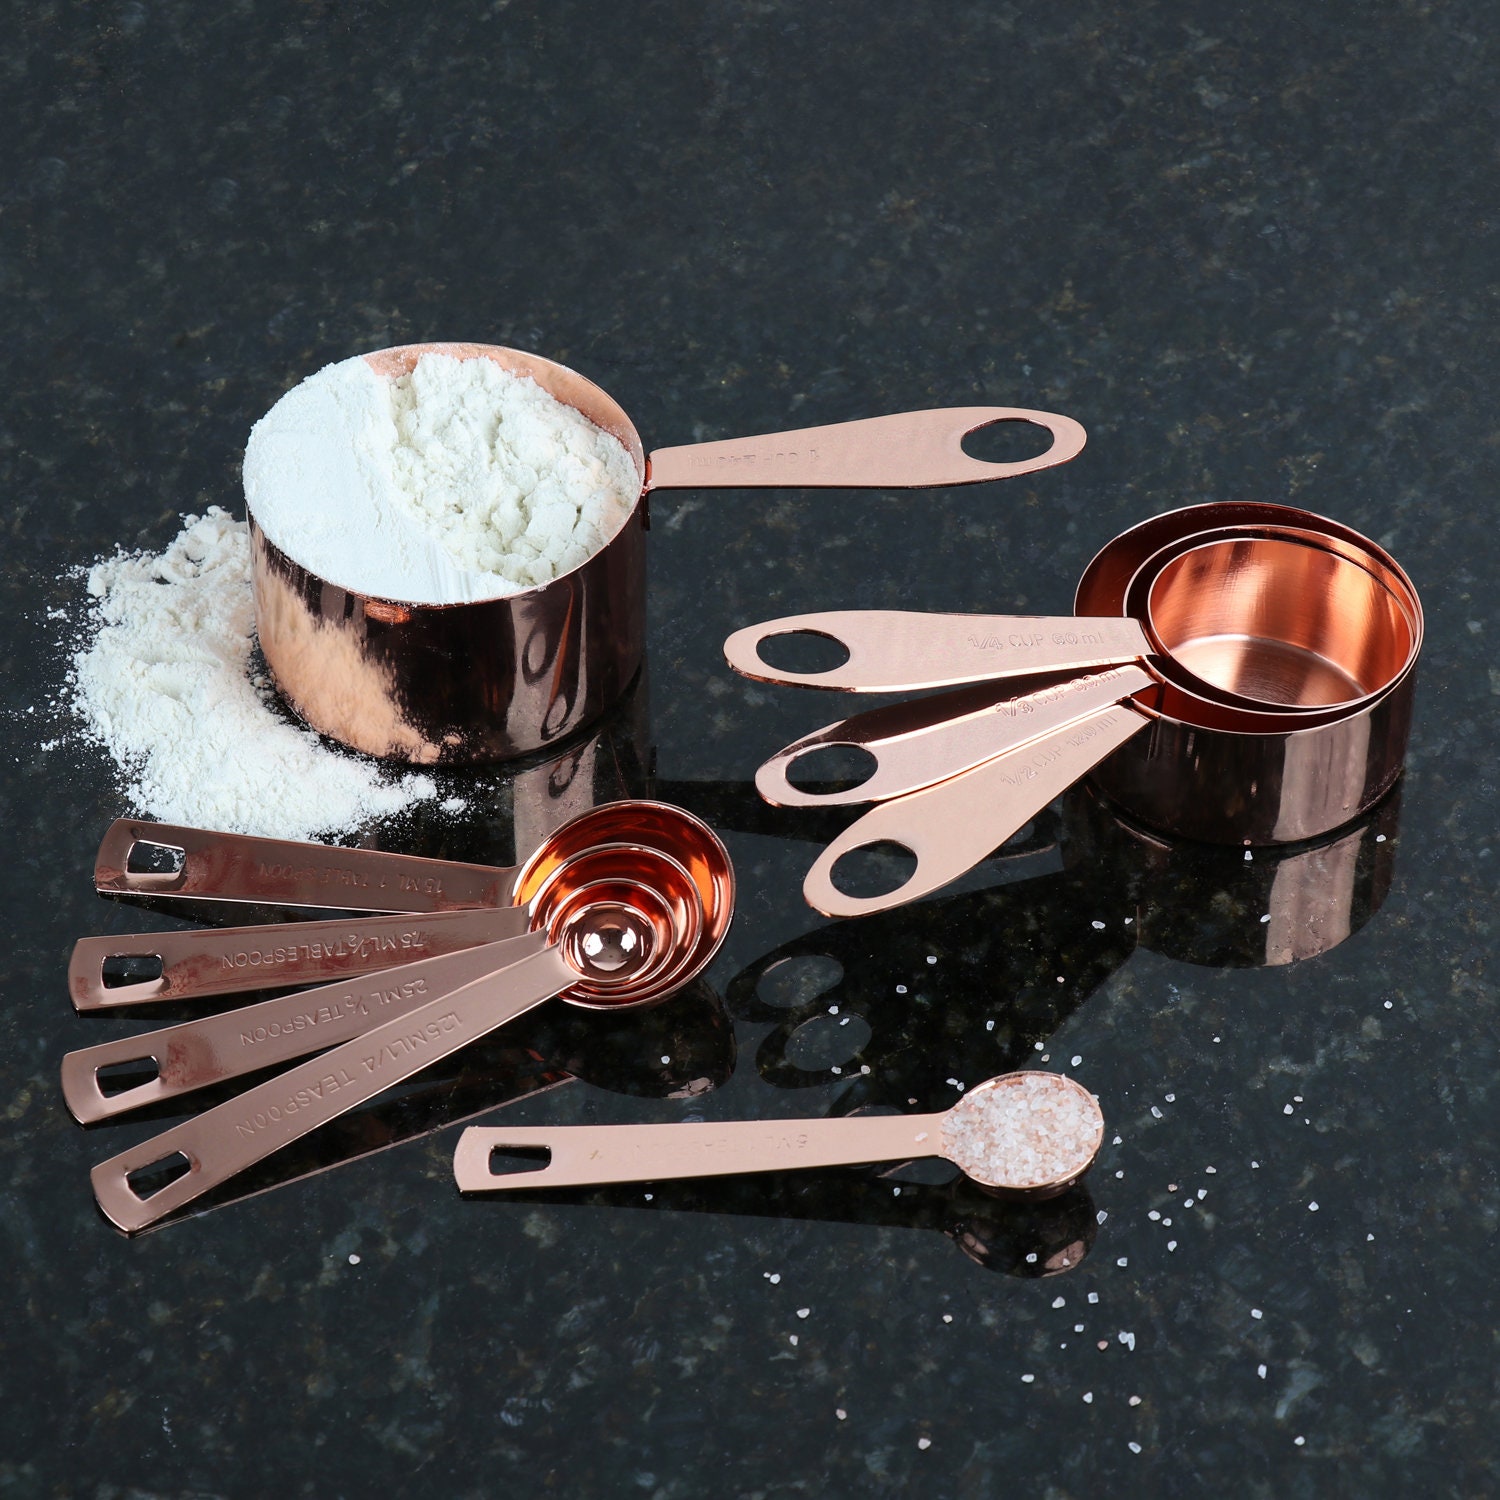 Stainless Steel Measuring Cups And Spoons Set Of 8 Engraved Measurements,  Metal Measure Sets With Ring For Kitchen Baking Cooking Rose Gold